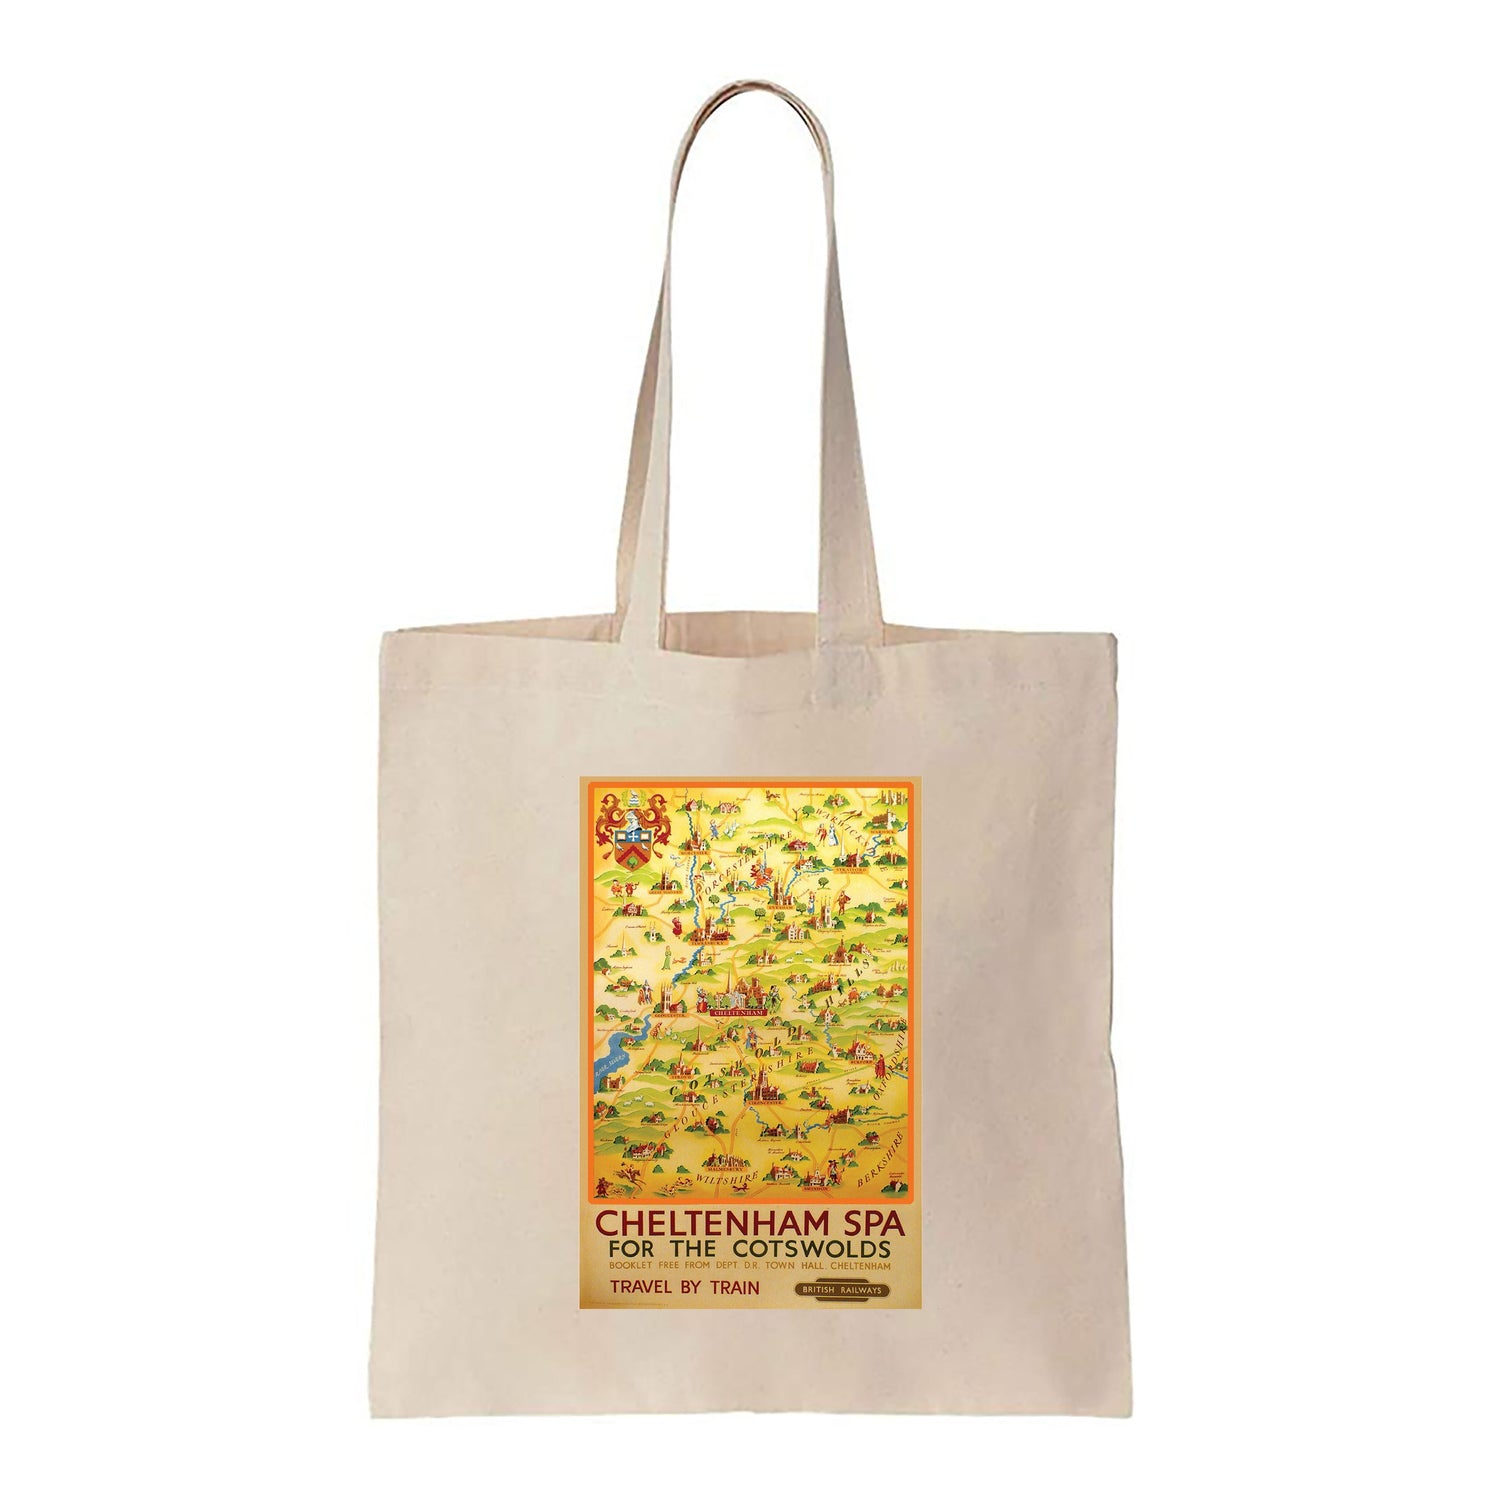 Cheltenham Spa for the Cotswolds - Canvas Tote Bag